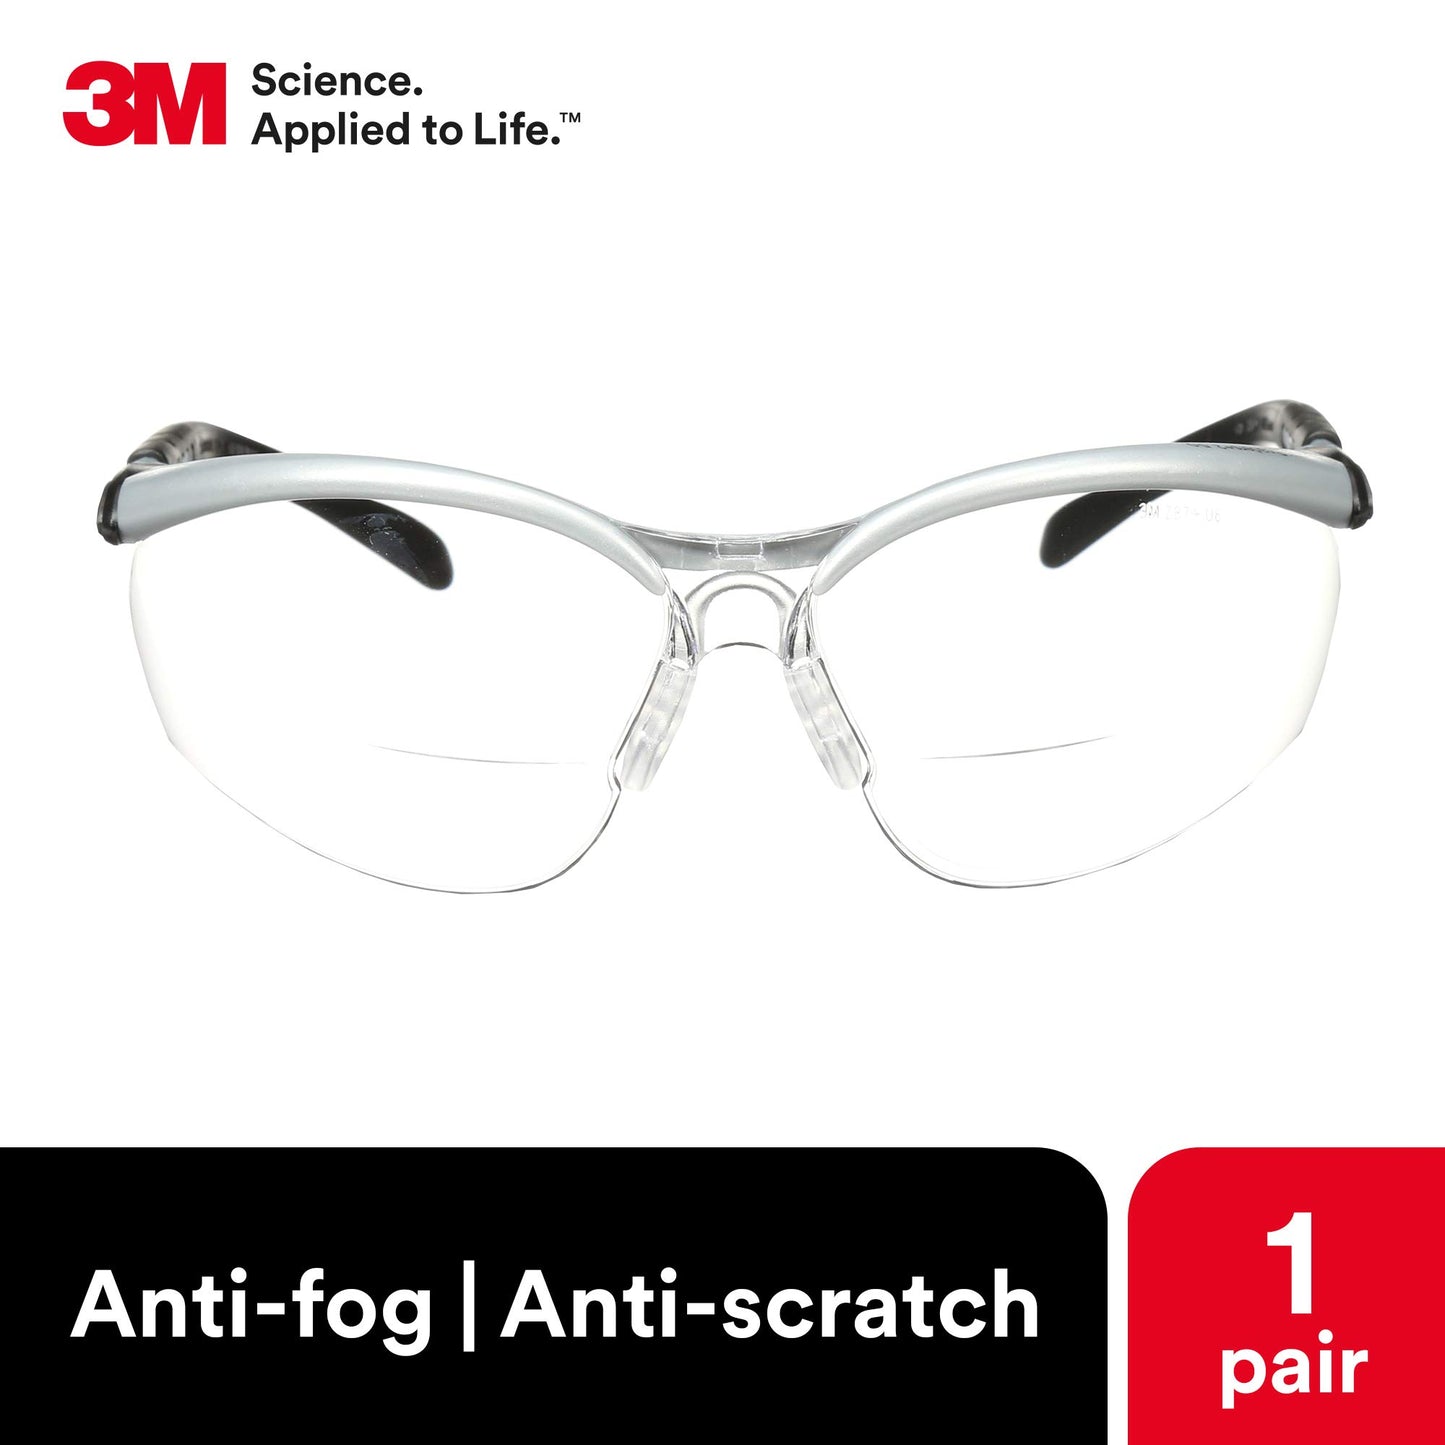 3M Safety Glasses with Readers, BX, +2.5, ANSI Z87, Anti-Fog Anti-Scratch Clear Lens, Silver Frame, Adjustable Length Temples and Lens Angle